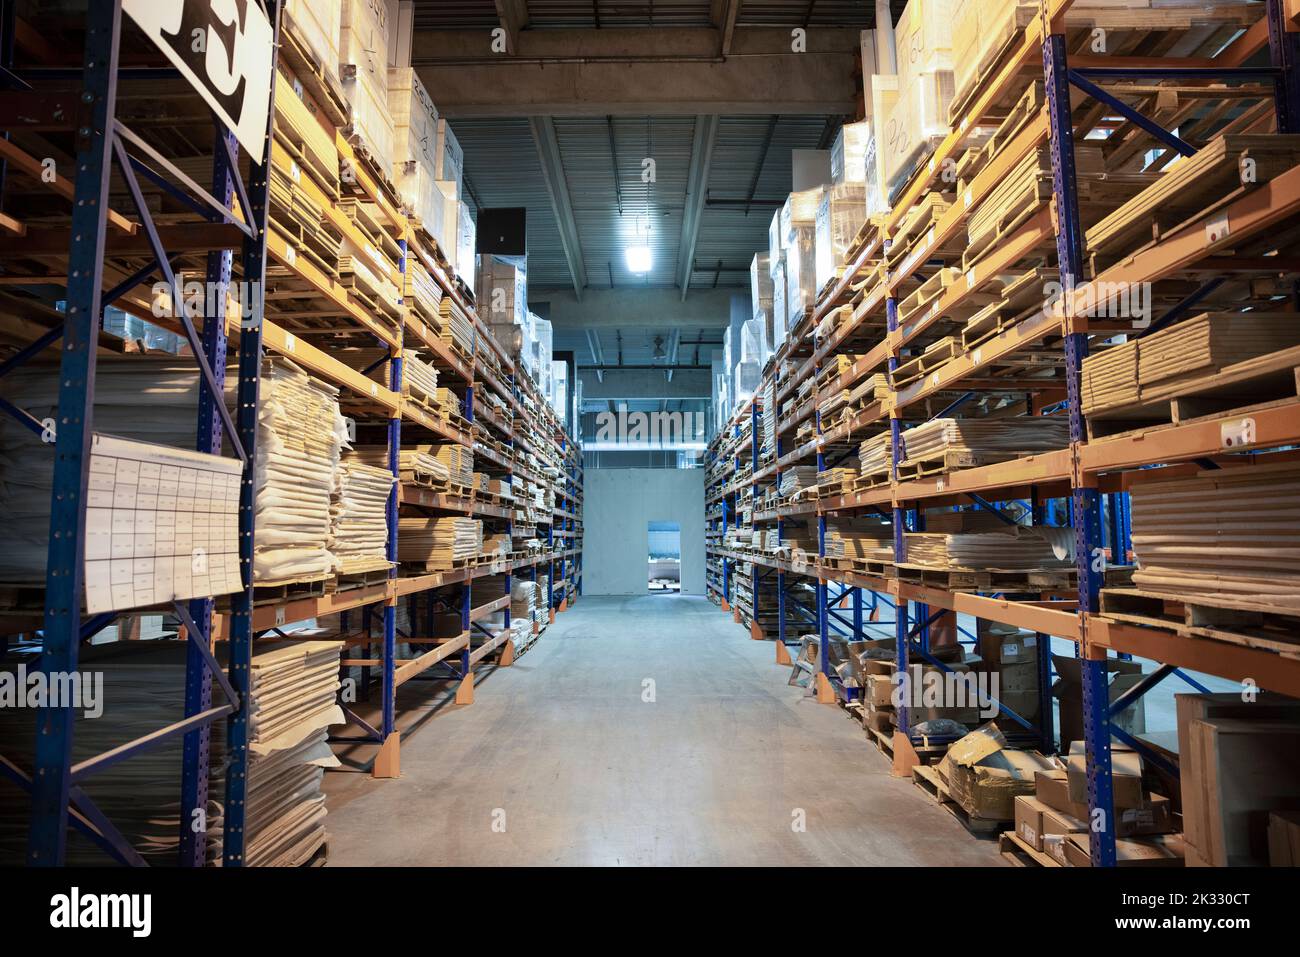 Distribution warehouse with high shelves Stock Photo